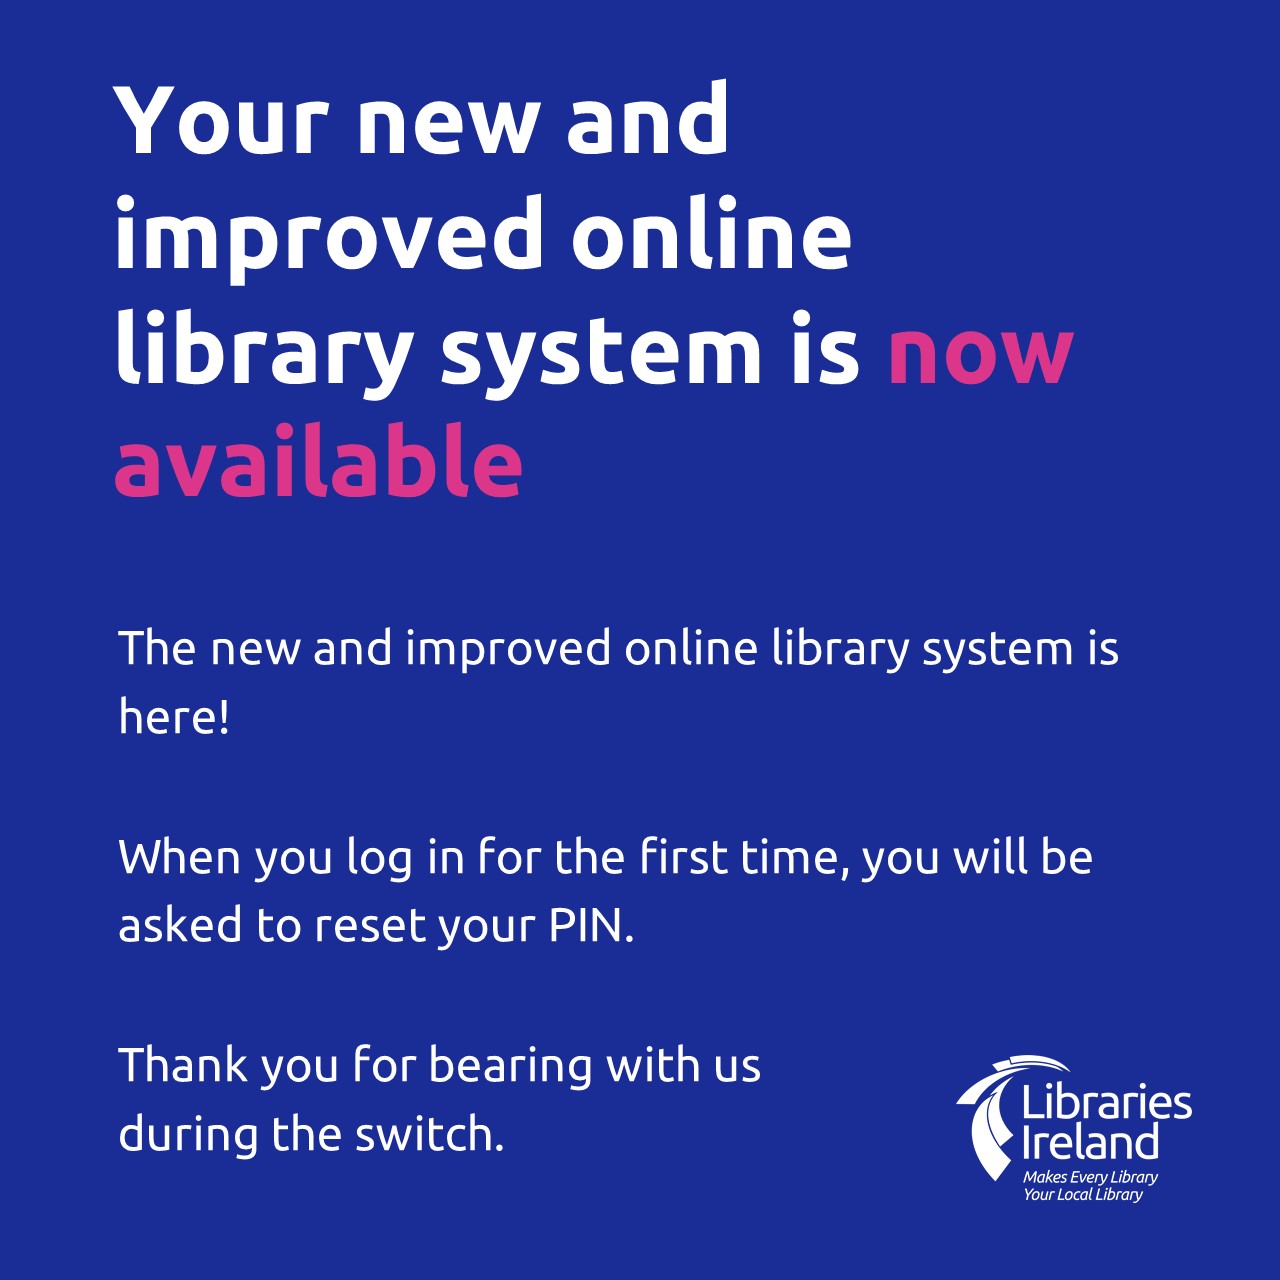 New online system now available